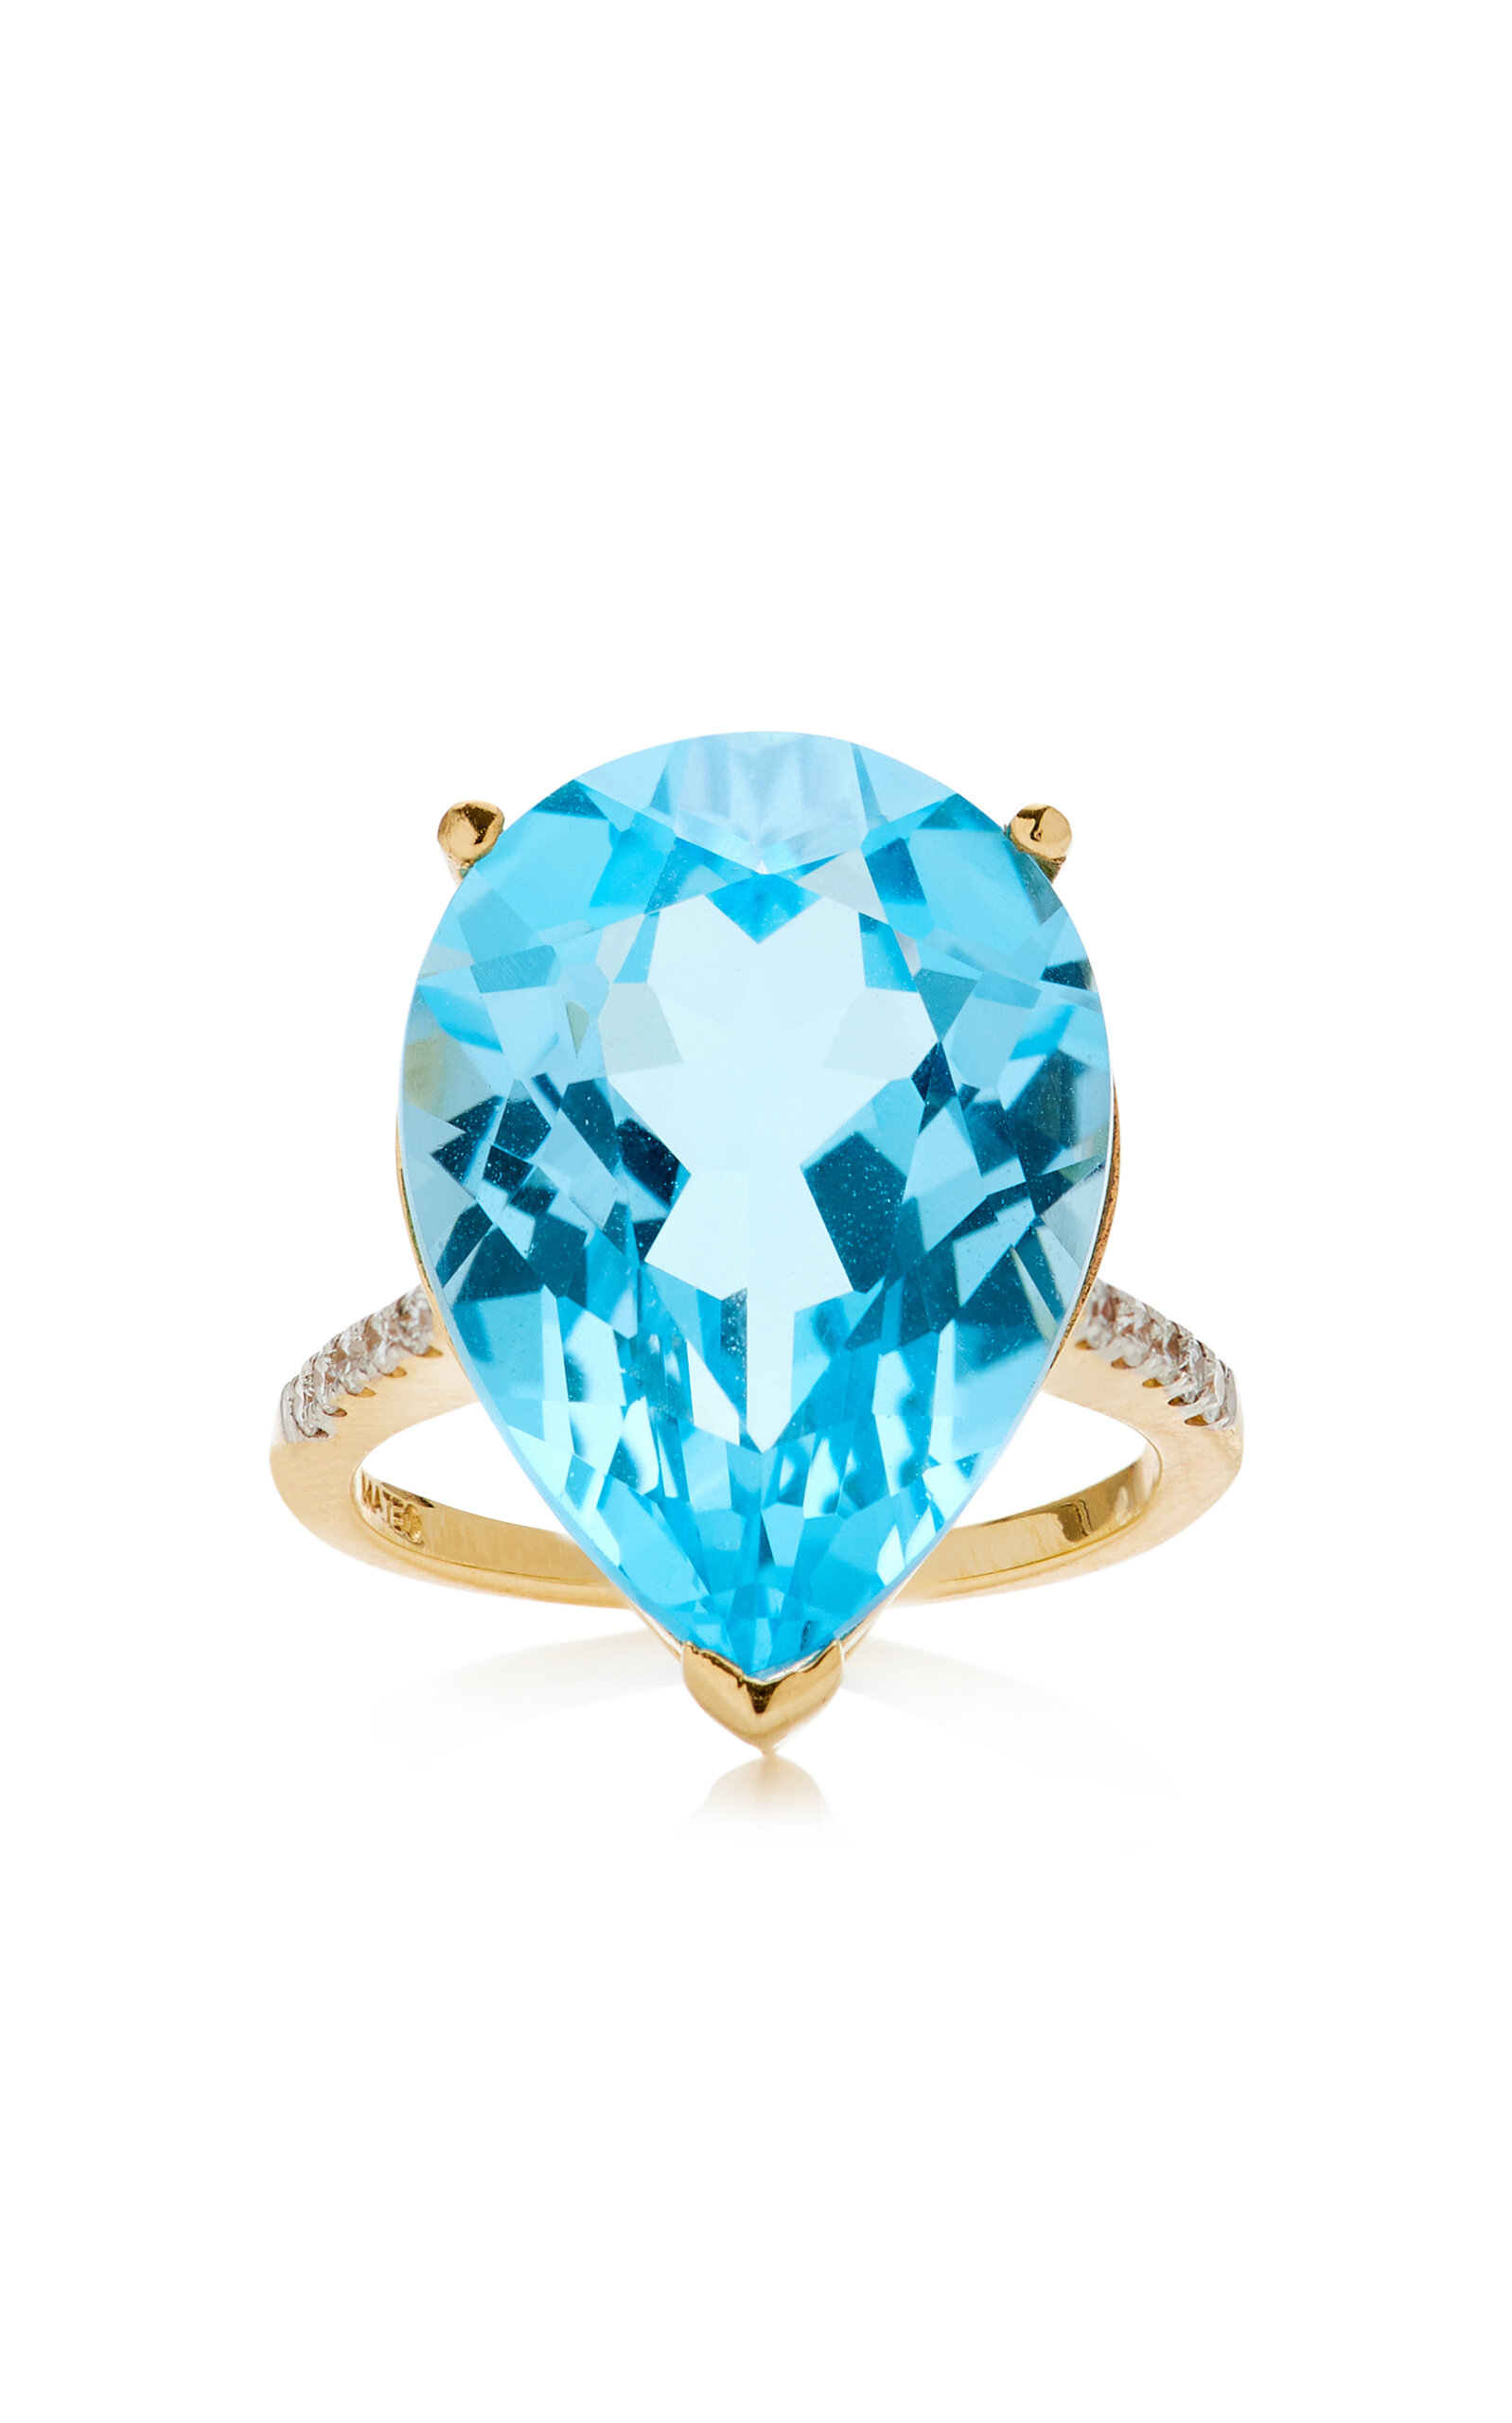 Mateo 14k Yellow Gold Topaz Ring In Blue